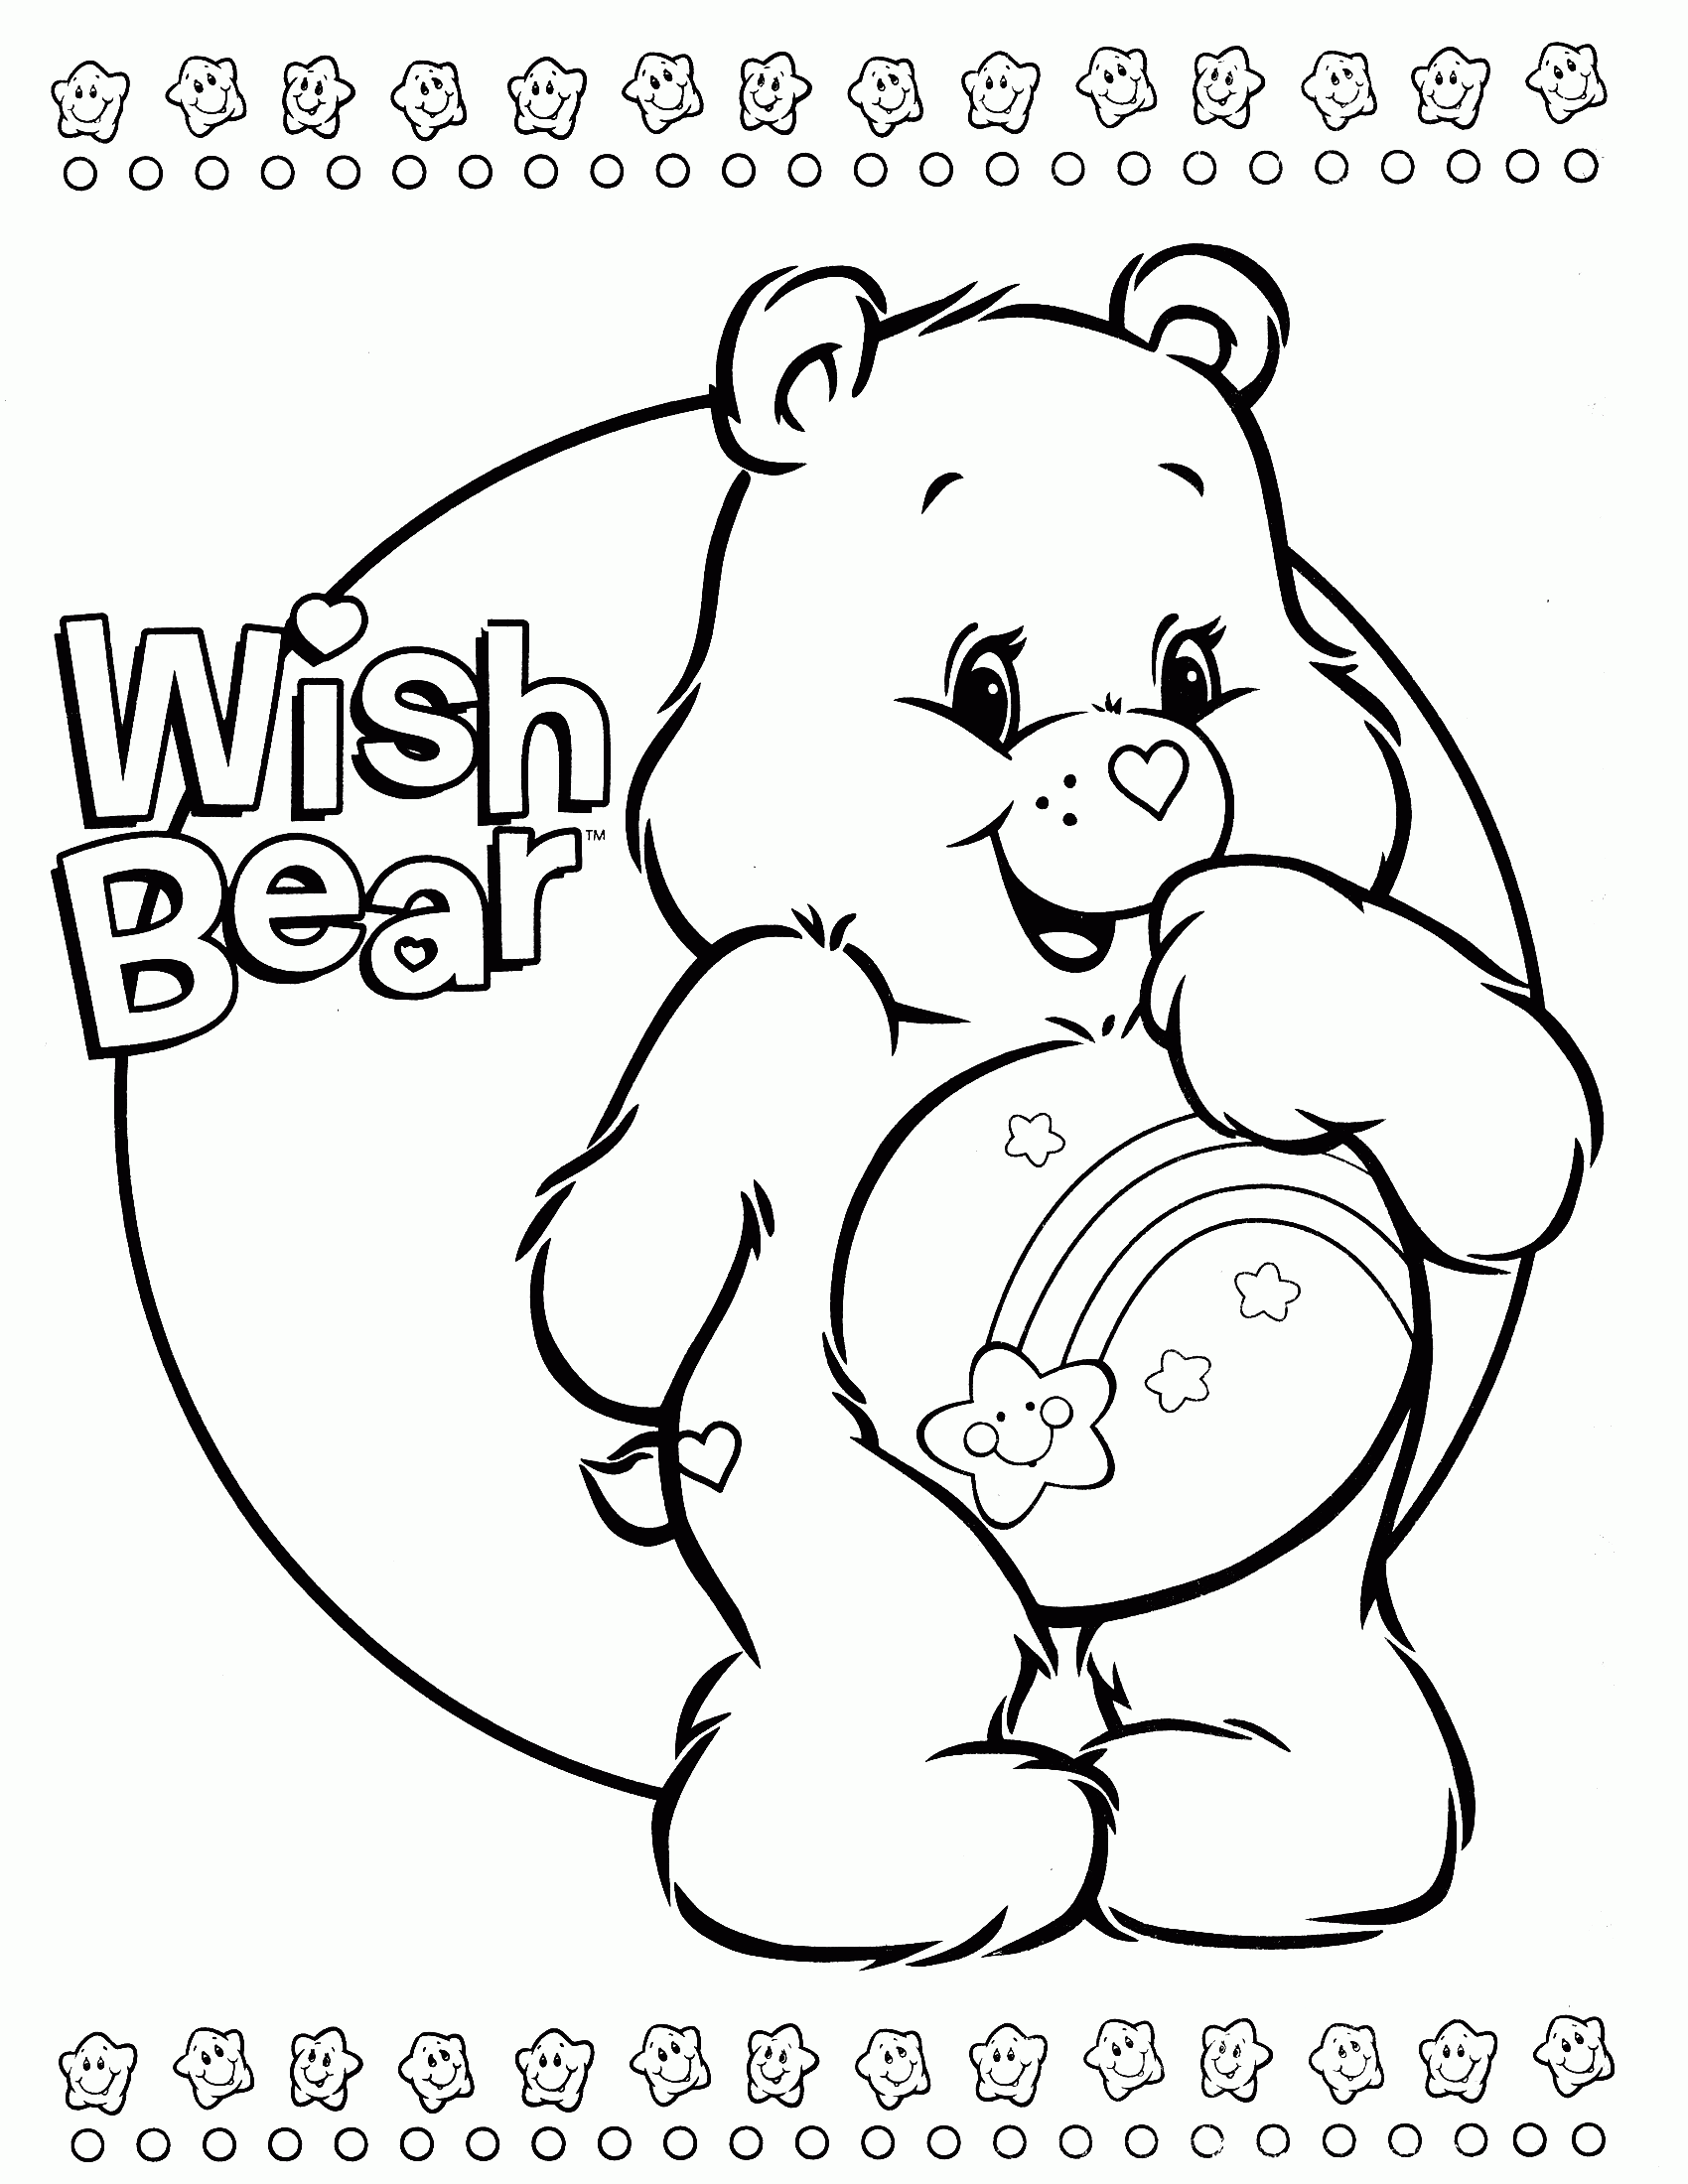 Care Bear - Coloring Pages for Kids and for Adults